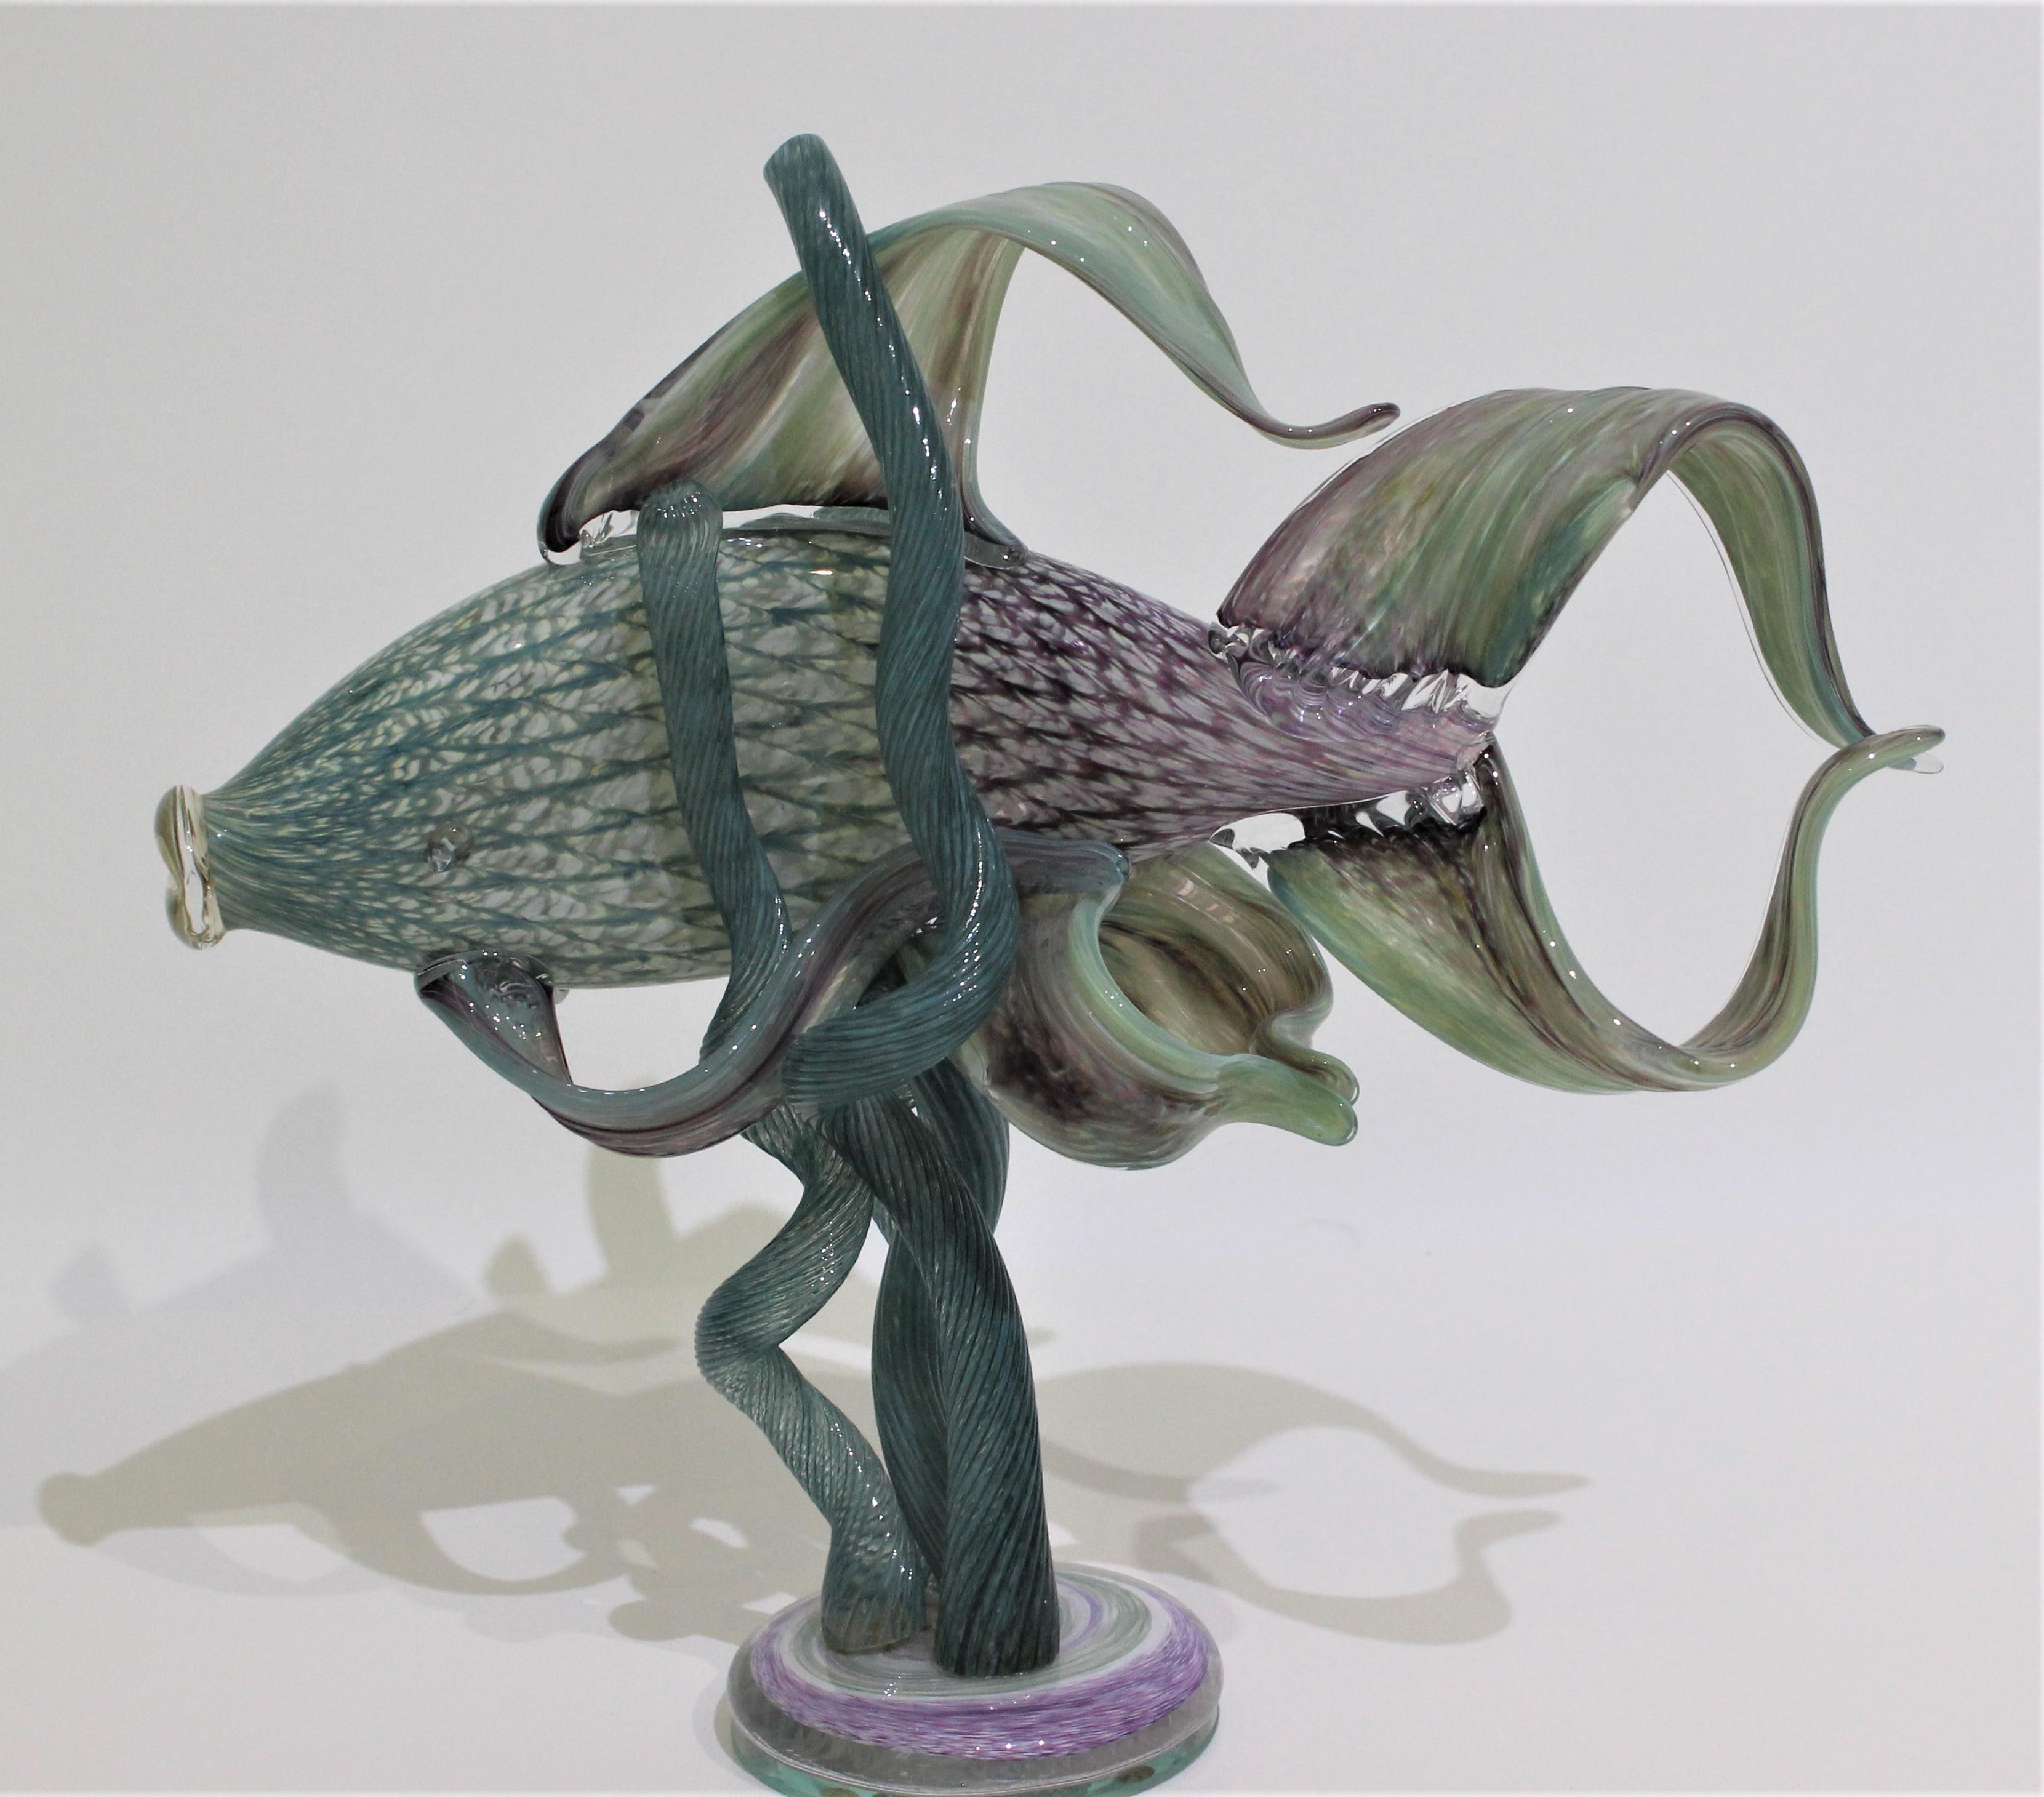 Hollywood Regency Glass Sculpture of an Exotic Fish